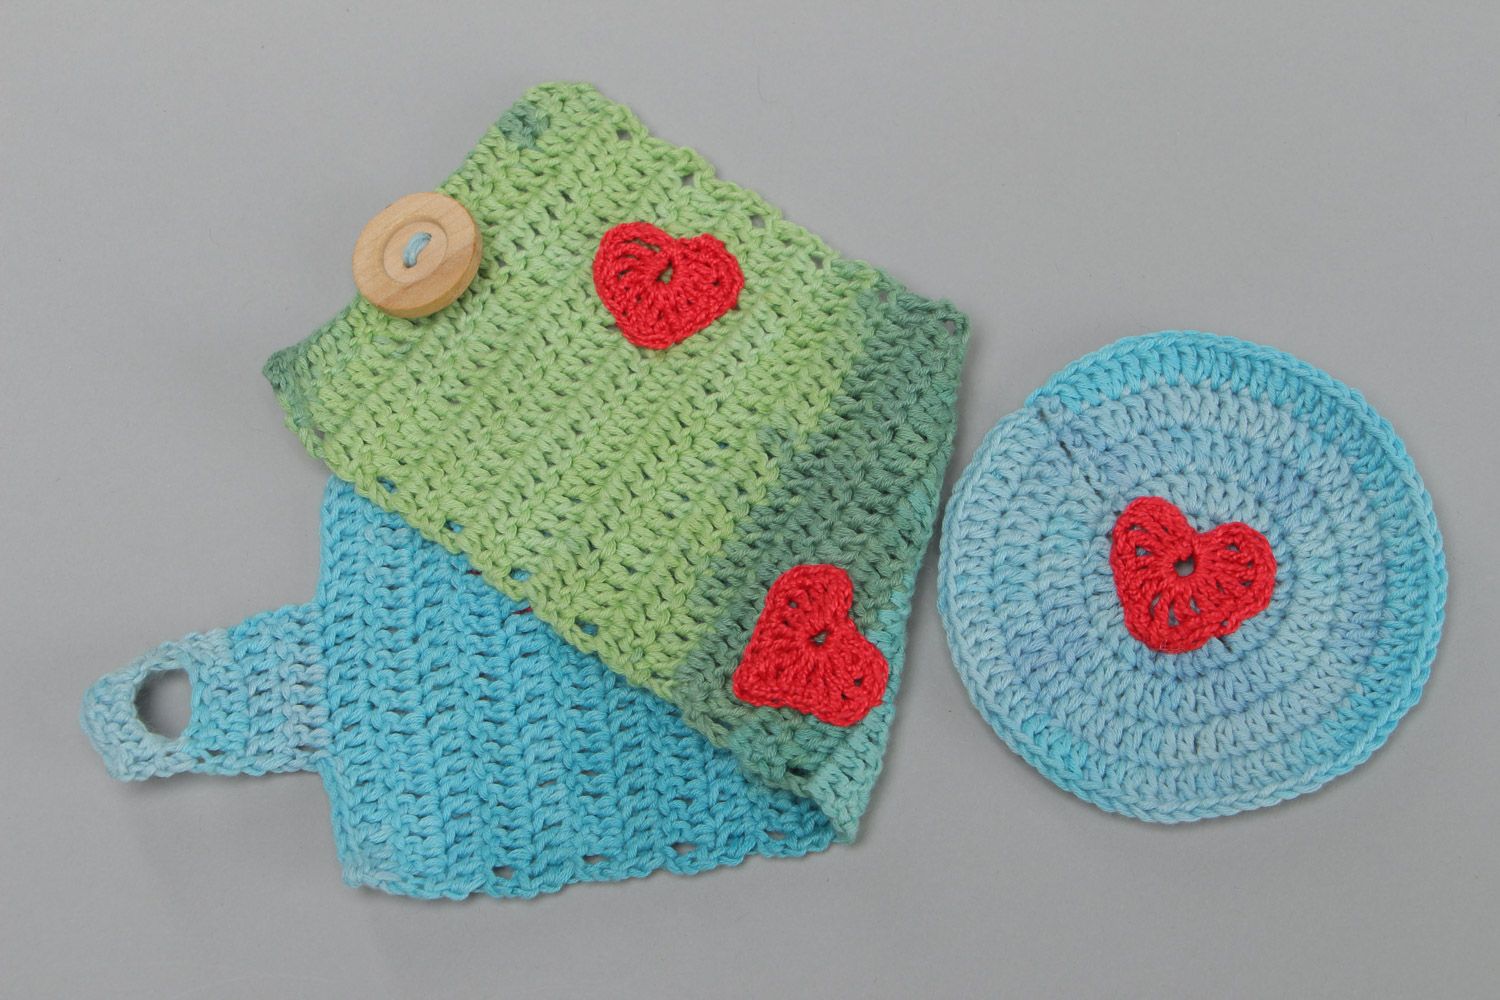 Handmade crochet cotton cup accessories set 2 items cup cozy and coaster photo 2